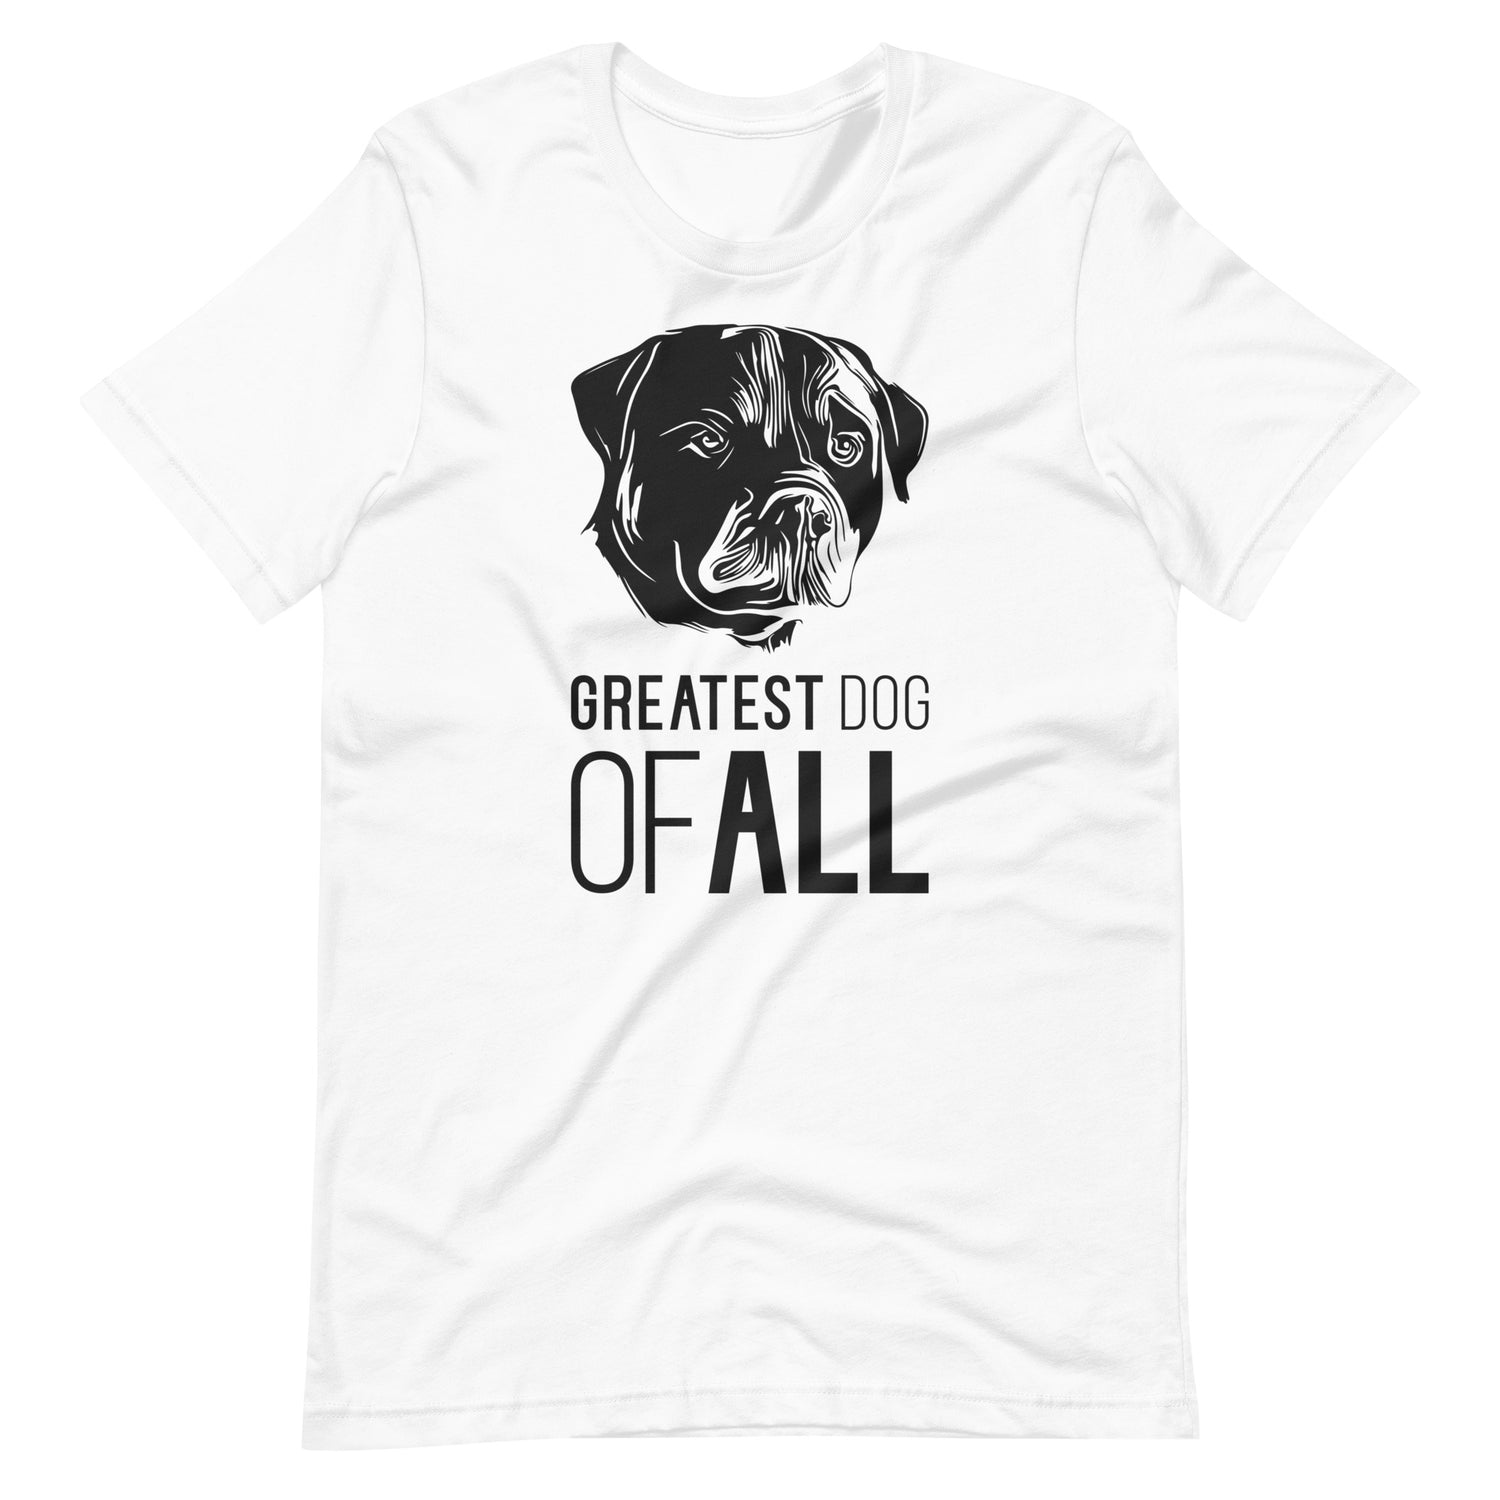 Black Rottweiler face silhouette with Greatest Dog of All caption on unisex white t-shirt